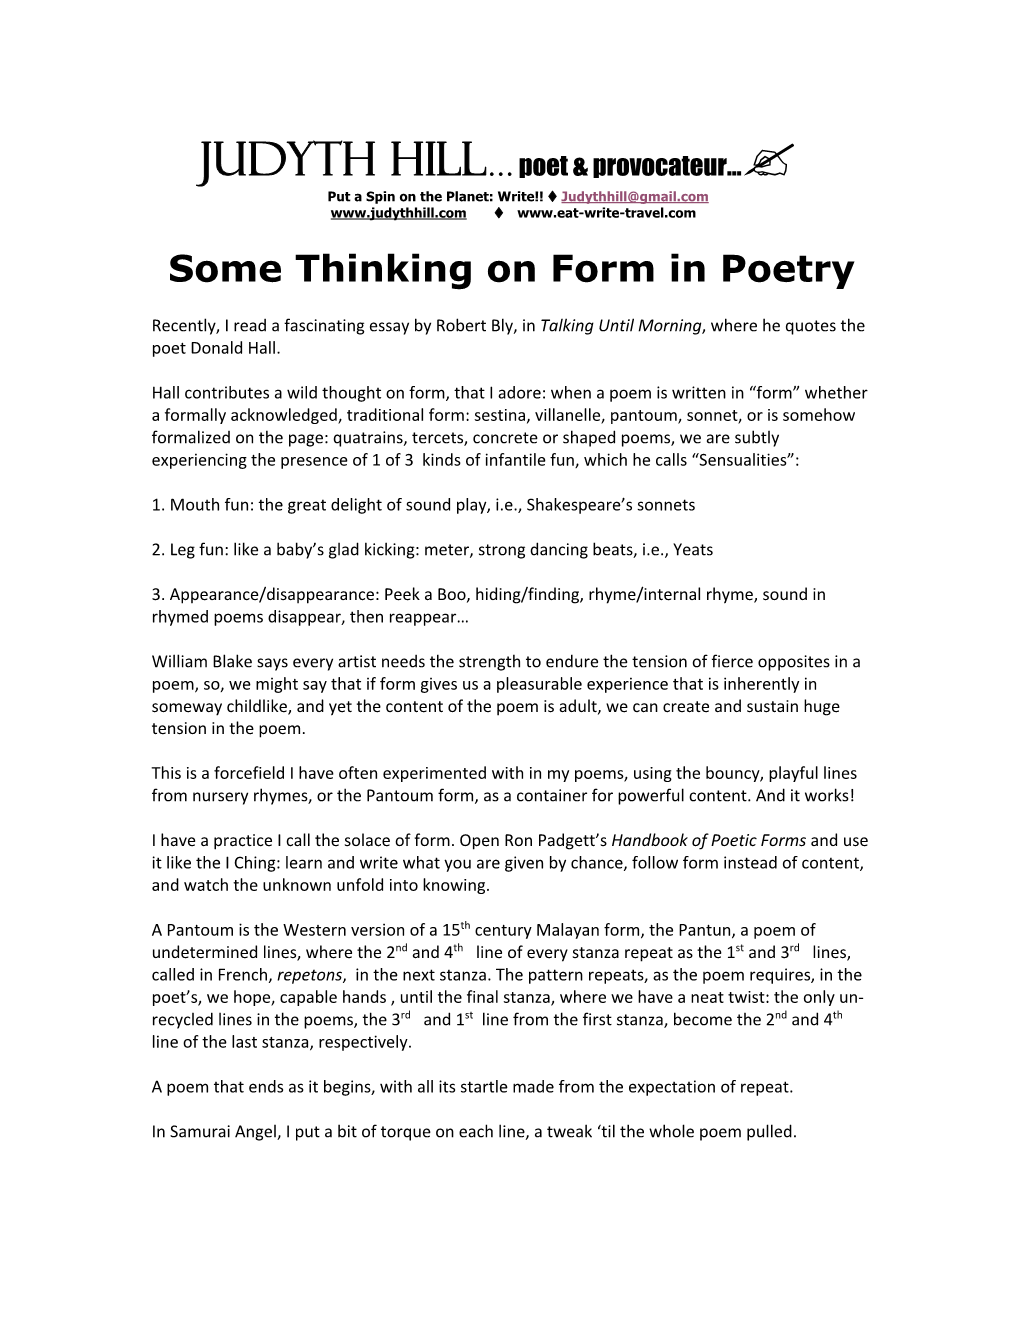 Some Thinking on Form in Poetry